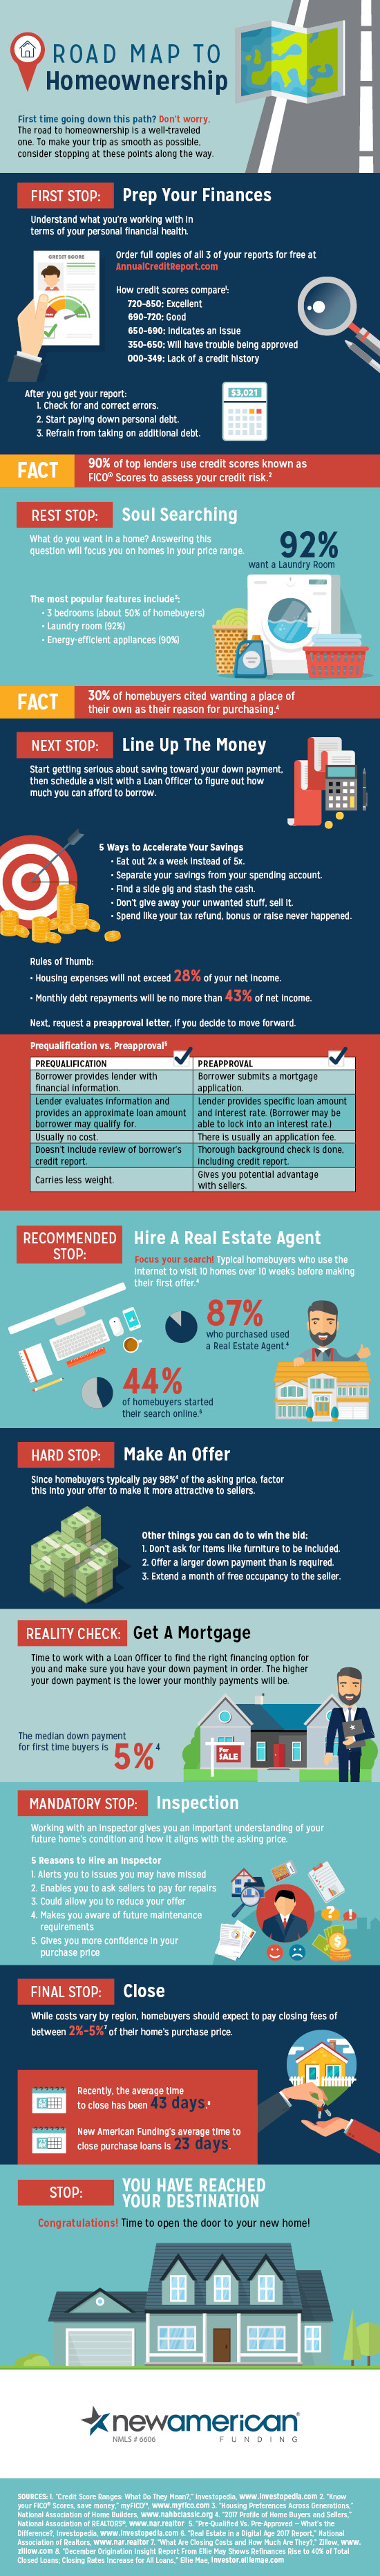 road map to homeownership for first time loans infographic